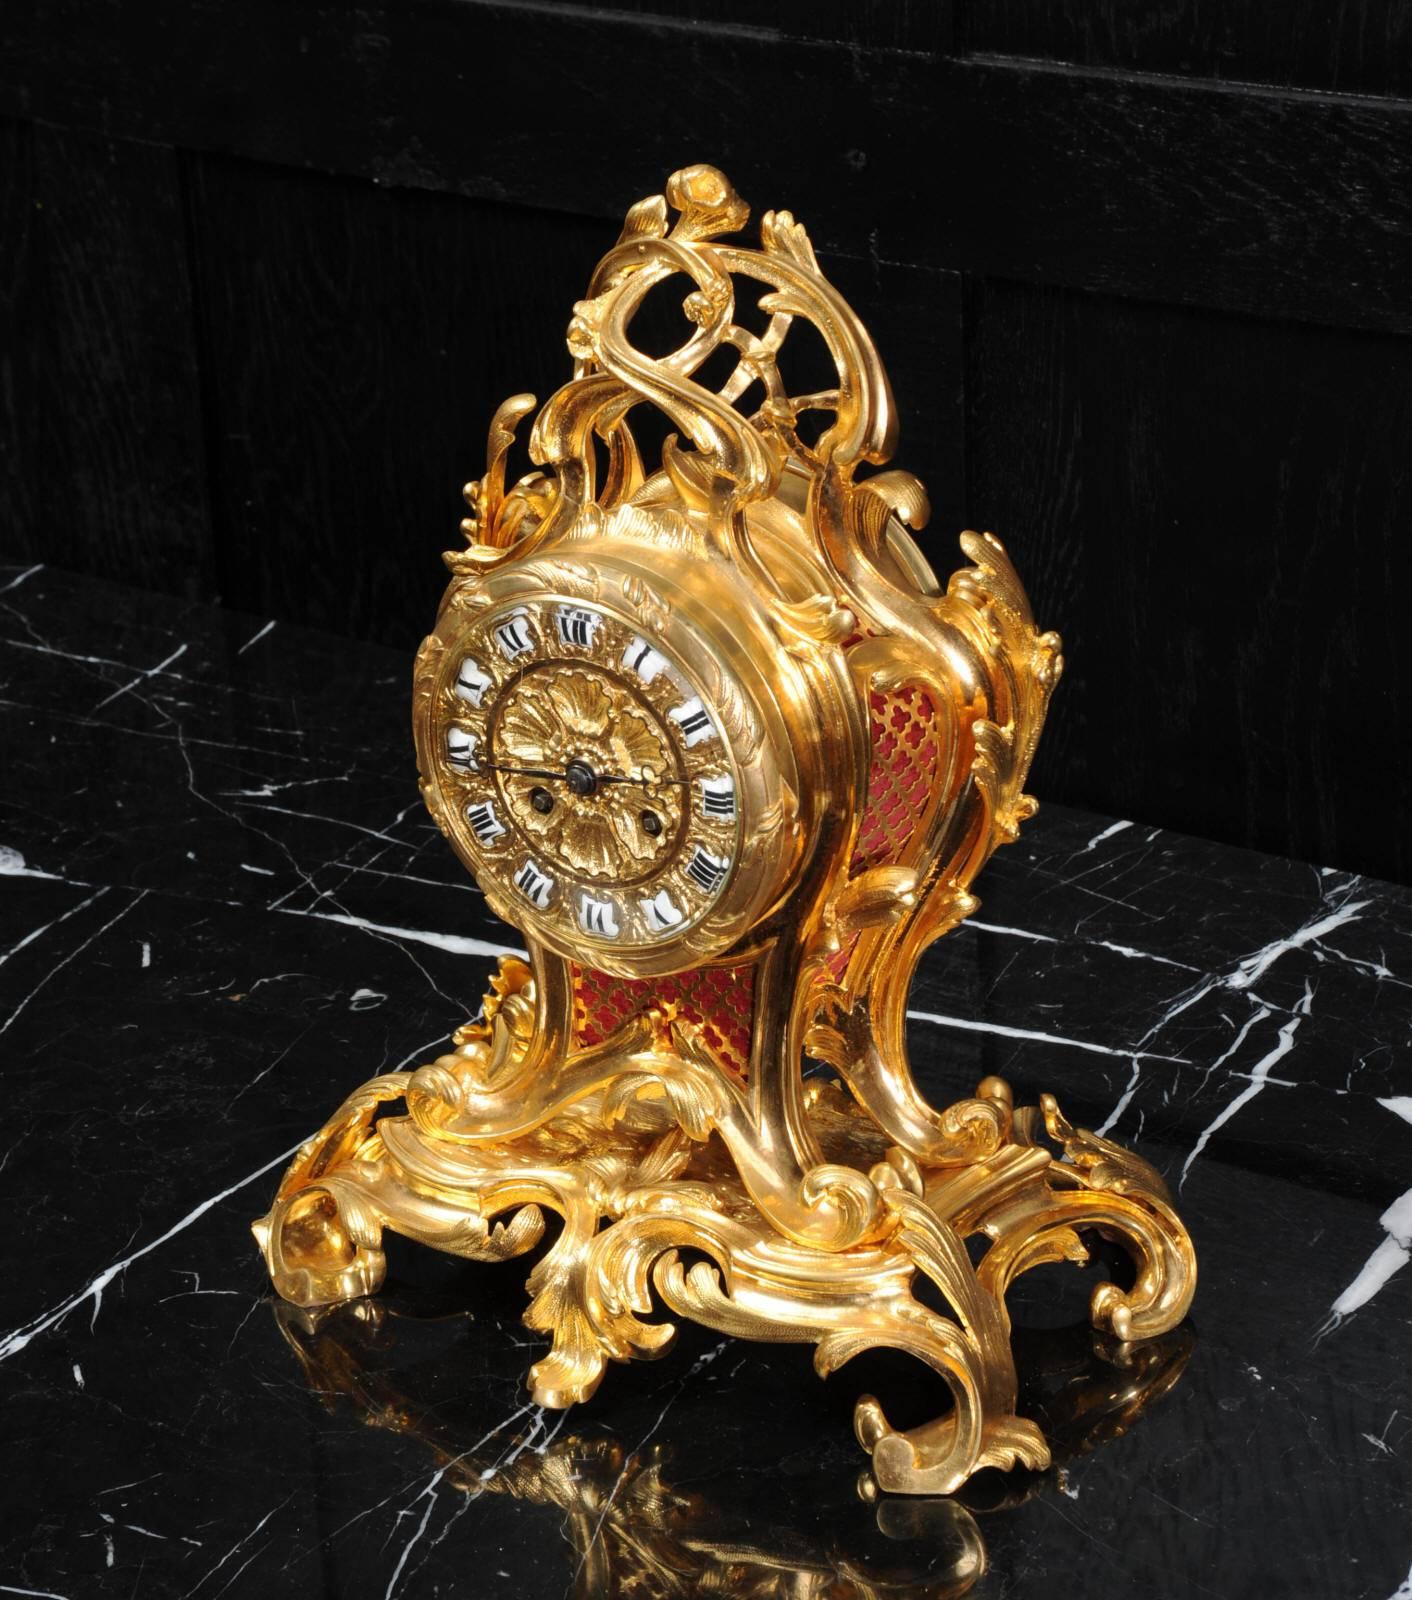 A beautiful original antique French Rococo table clock by the celebrated bronze foundry of Charpentier et Cie. It is finely made in gilded bronze, boldly sweeping curves of leaves rise to a twirling finial. The dial is deeply molded with sea shells